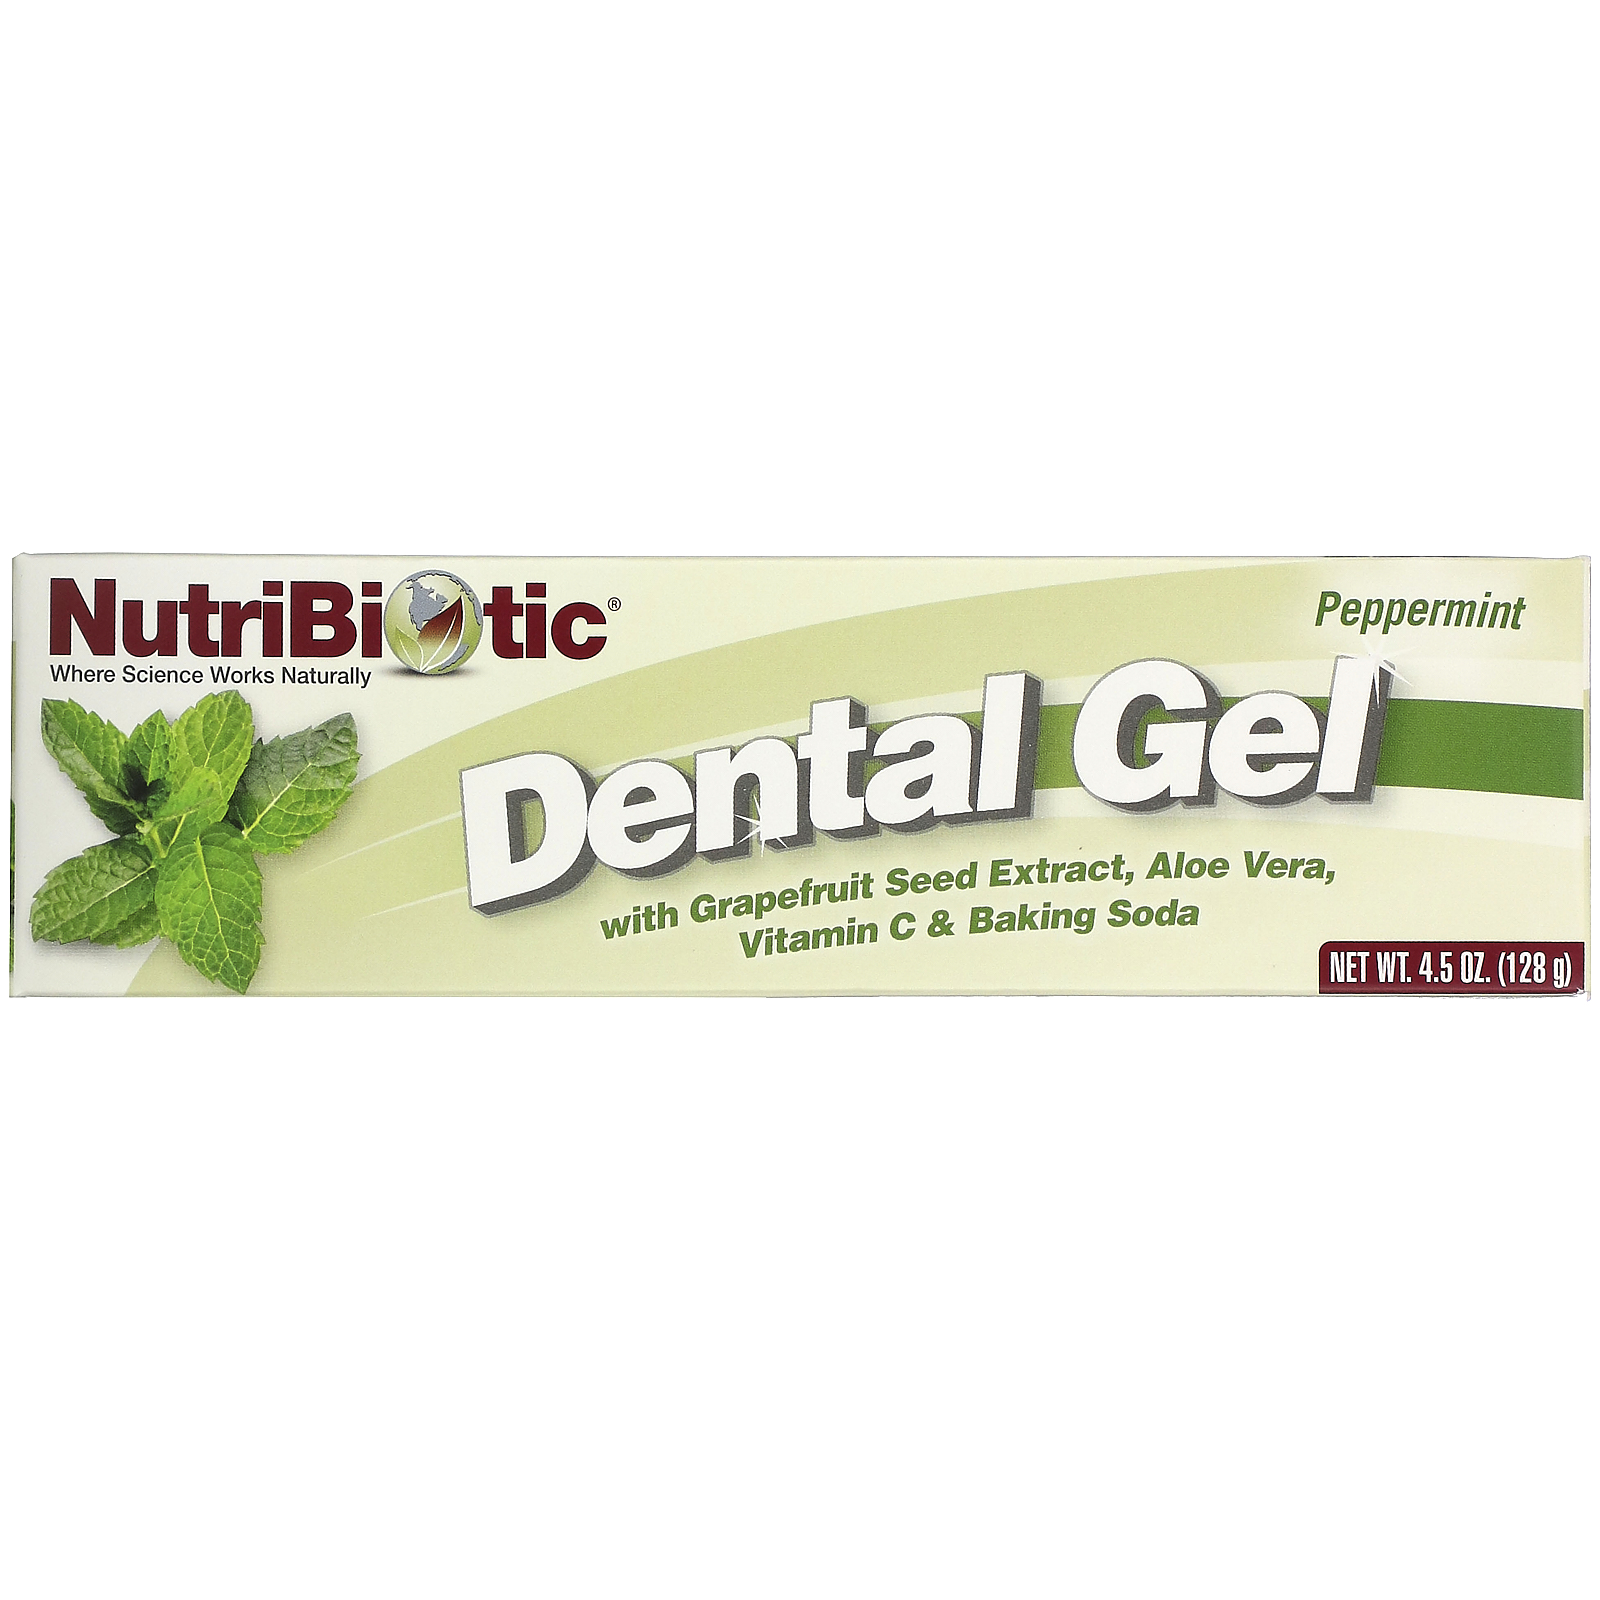 peppermint dental prices